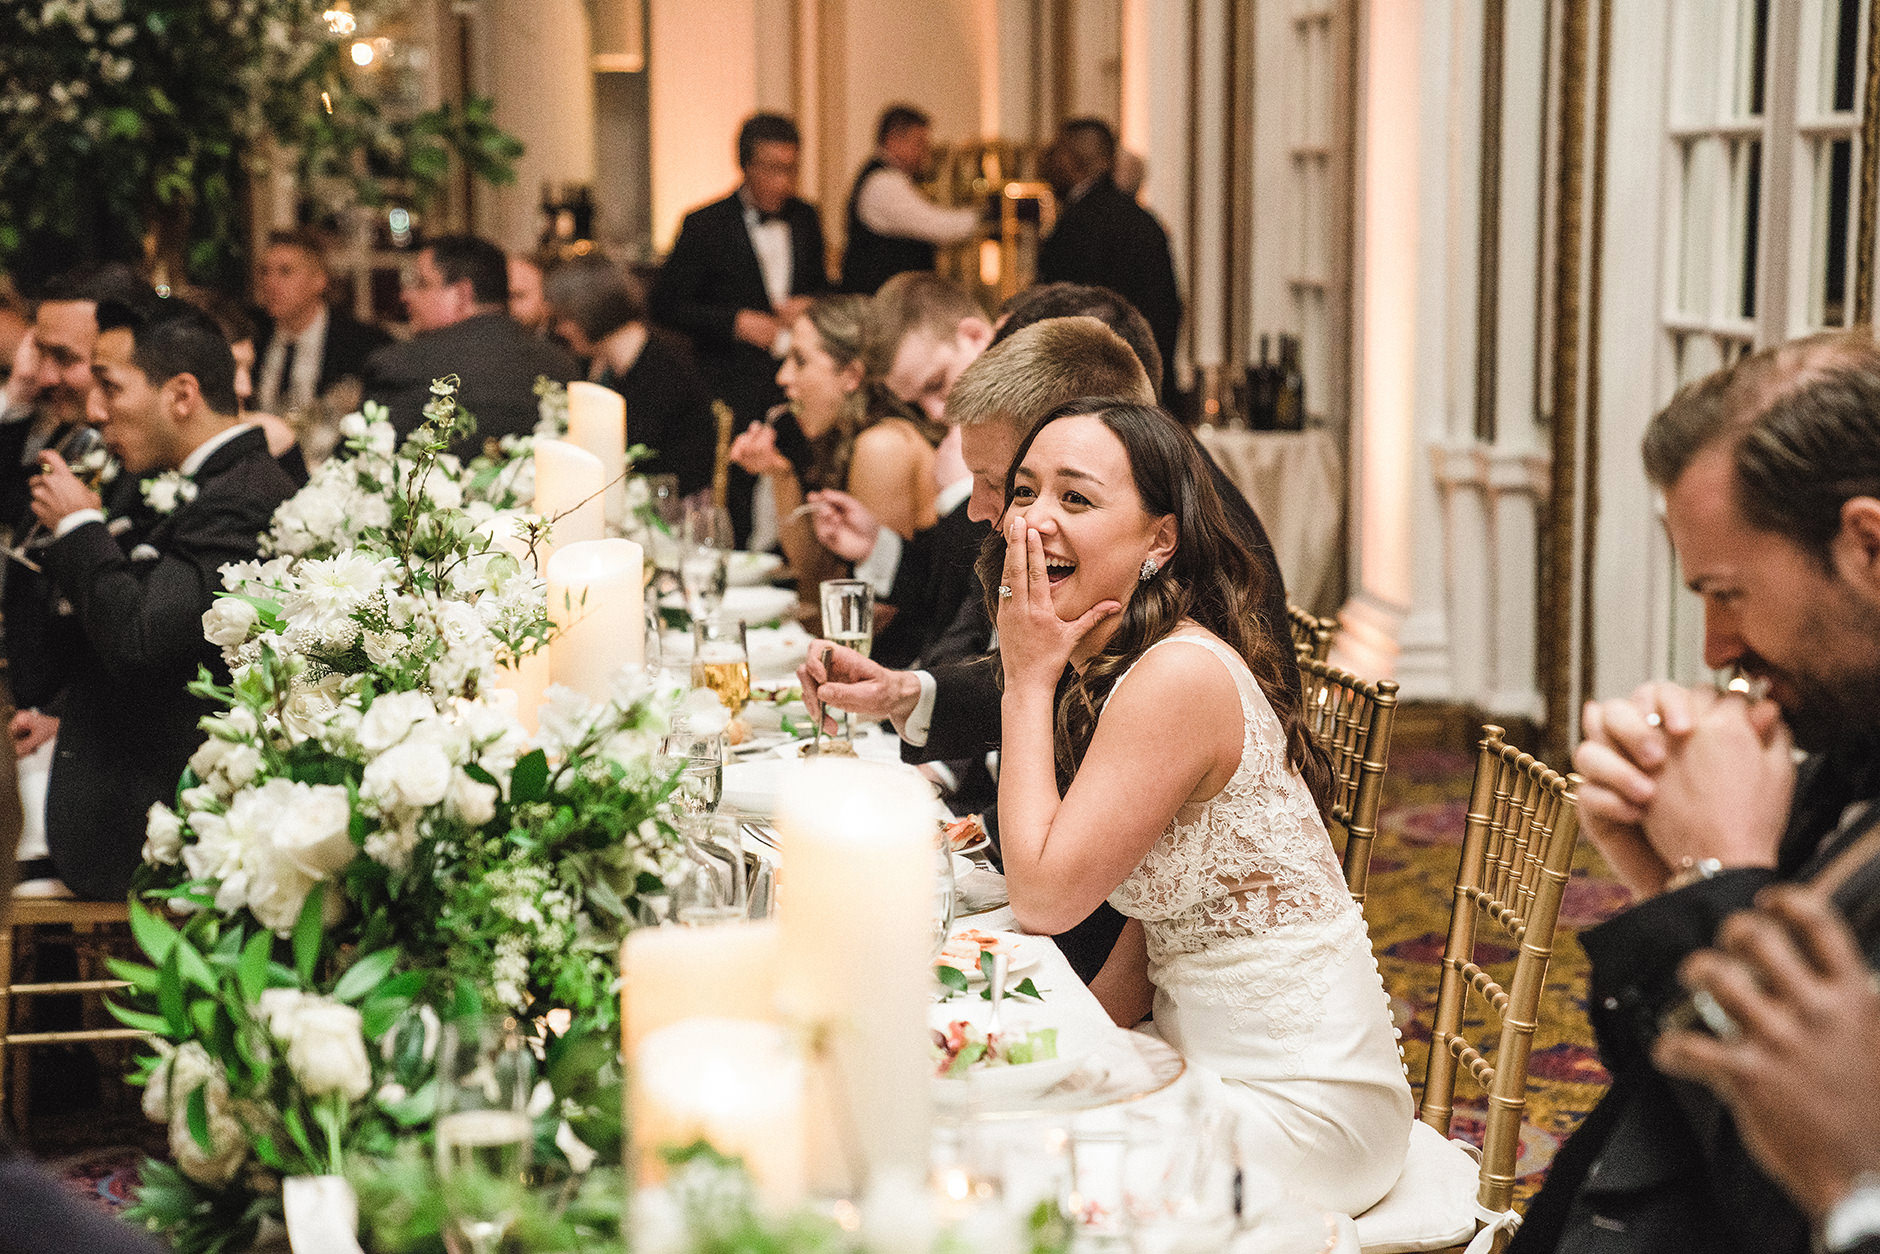 A best of Boston wedding photograph of a bride laughing during the wedding toasts at her Fairmont Copley wedding